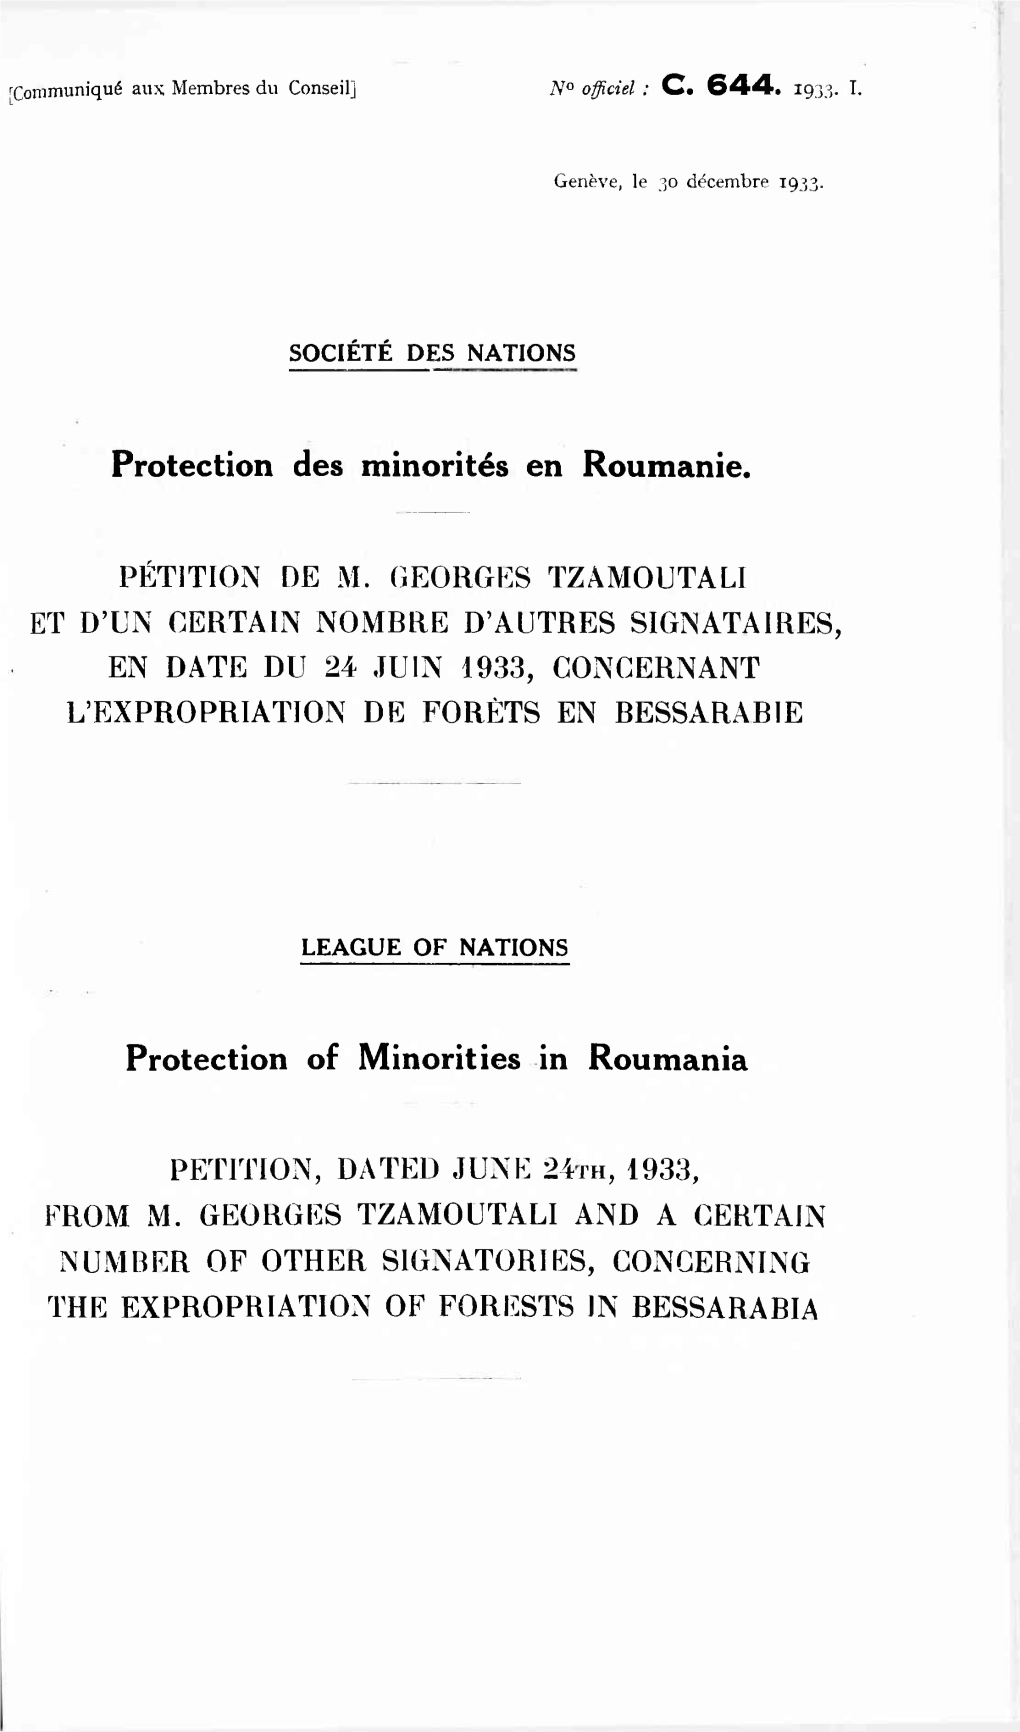 Protection Des Minorités En Roumanie. Protection of Minorities in Roumania